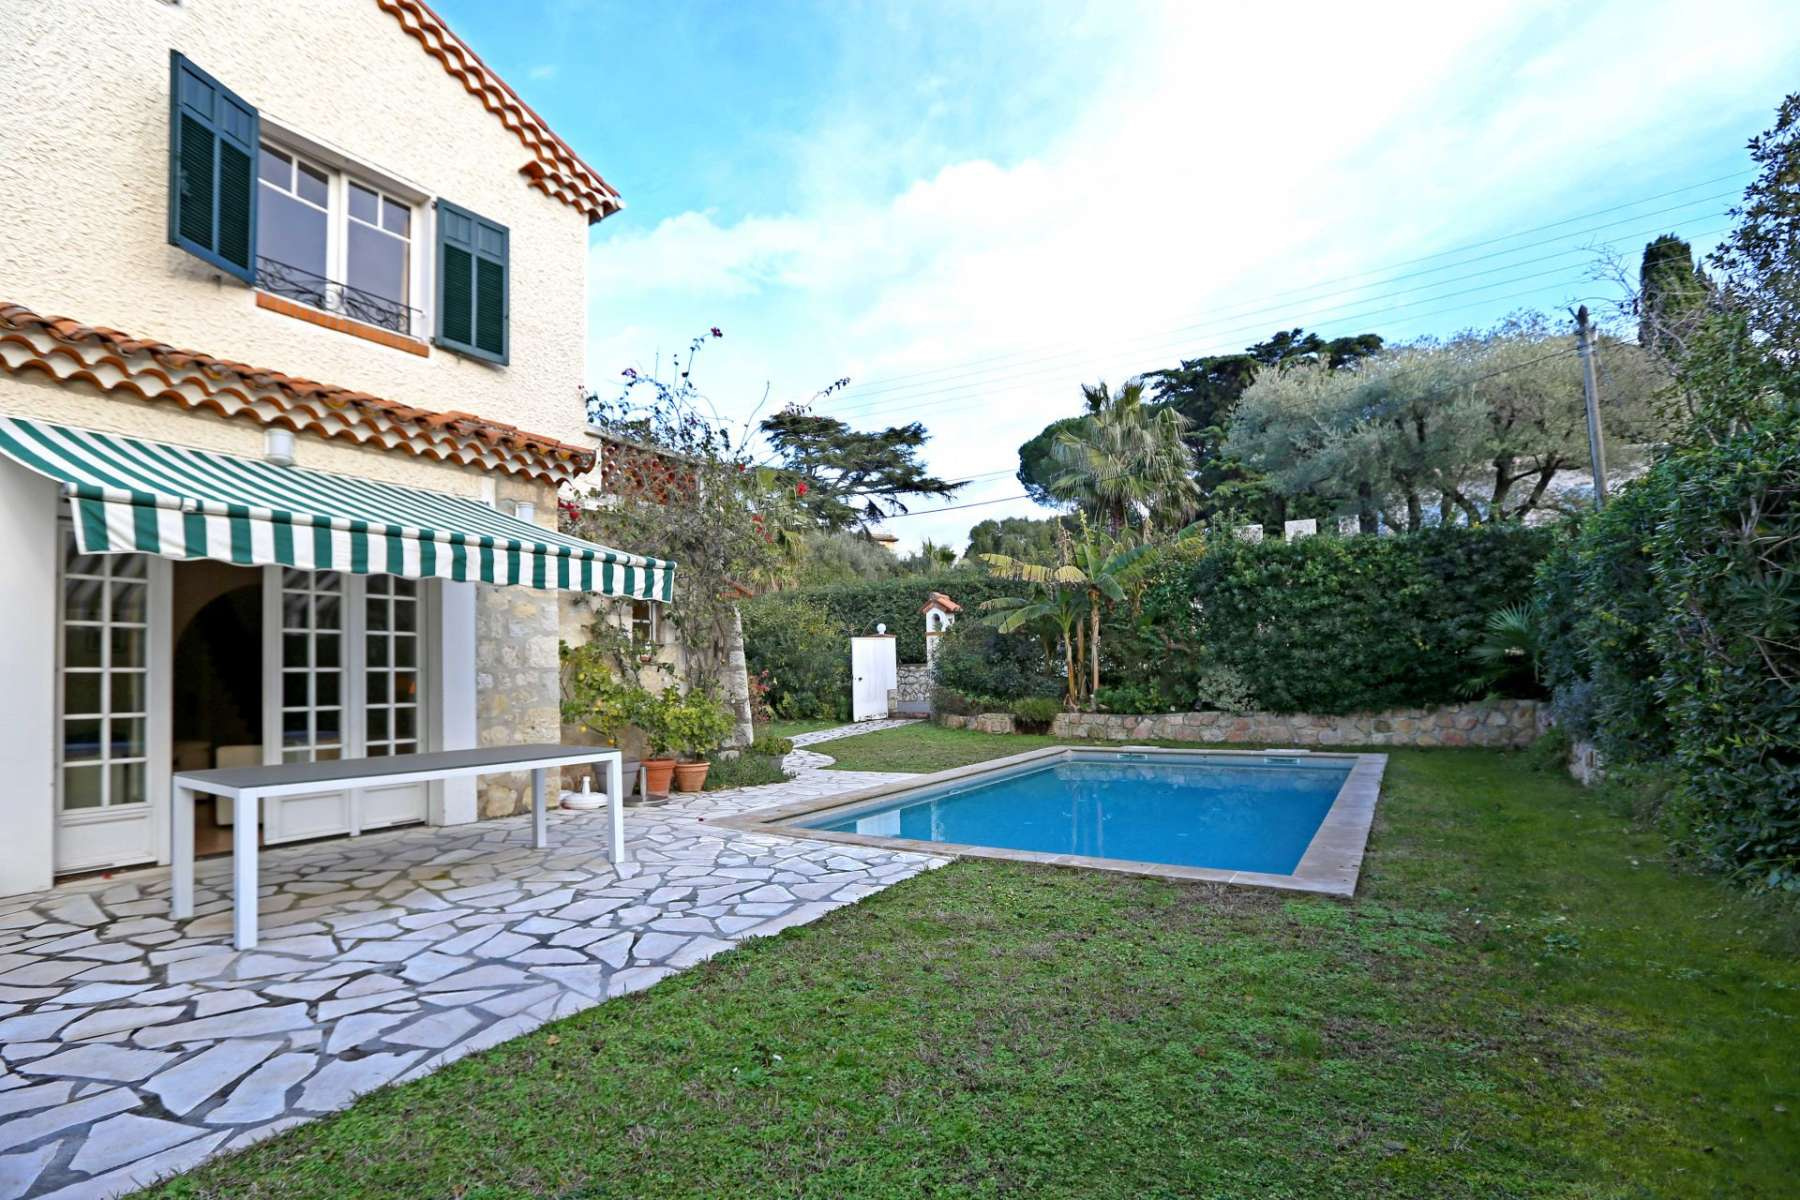 House close to the sea for rent in Cap d'Antibes